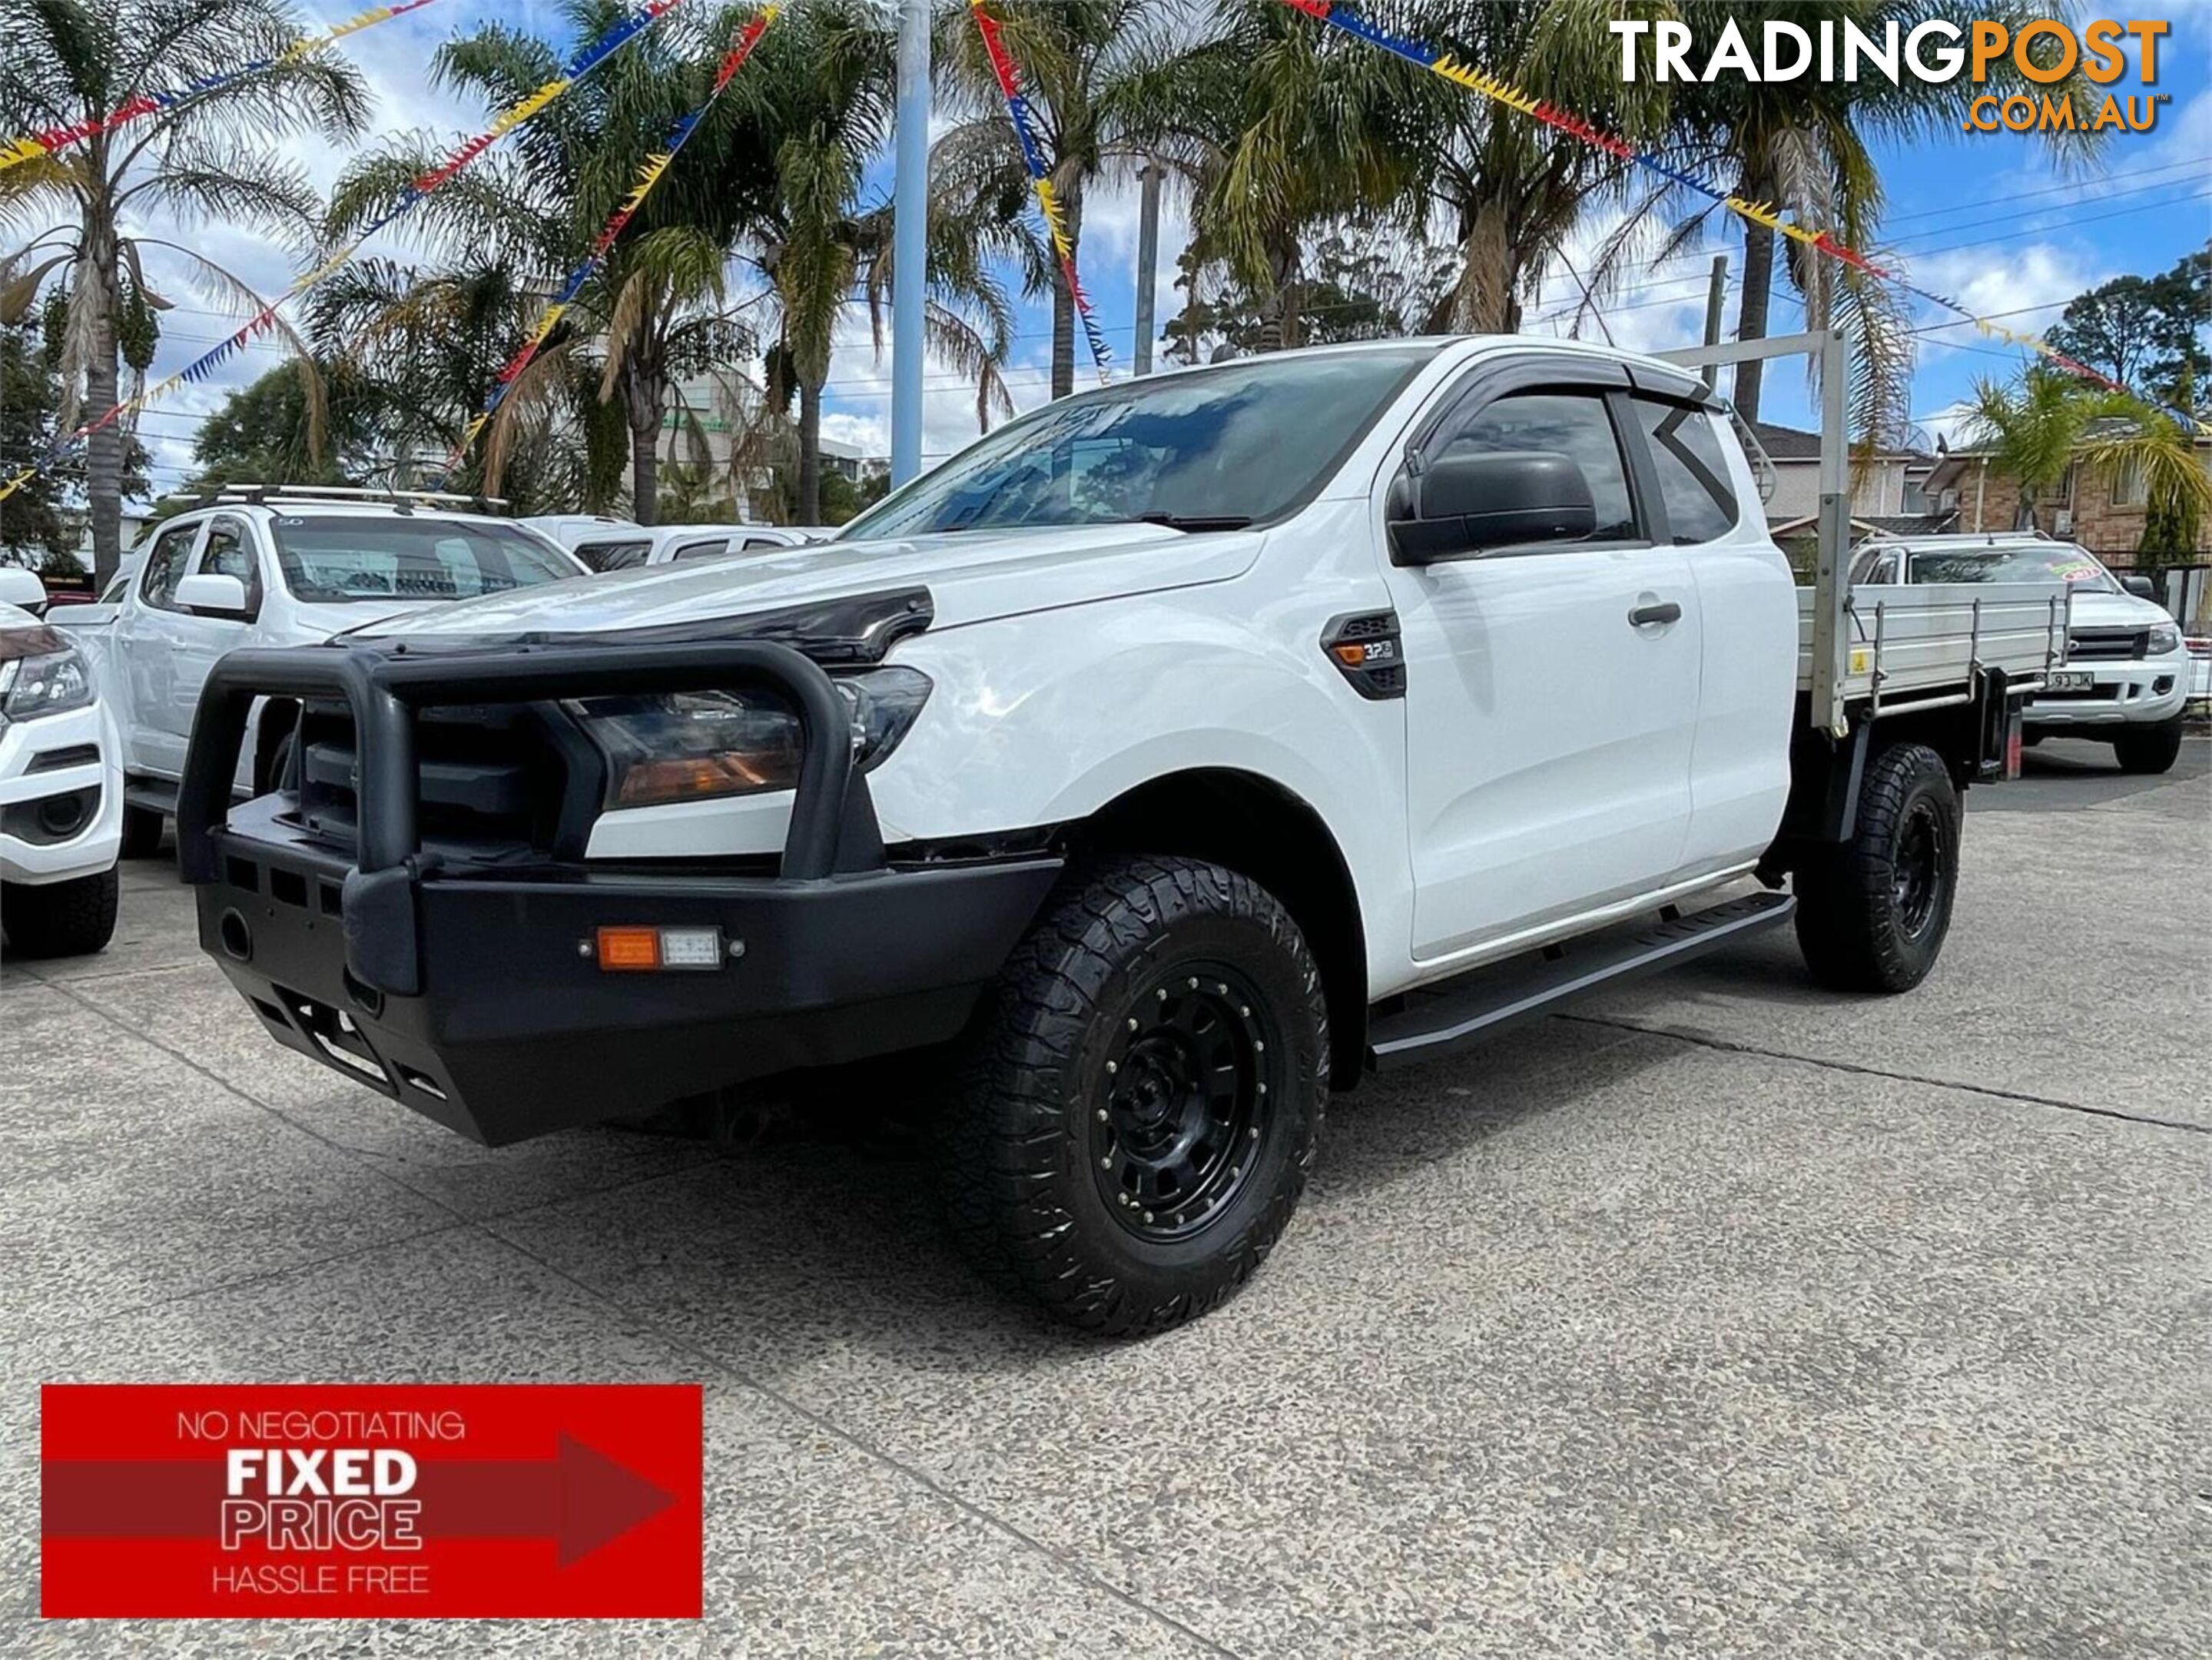 2016 FORD RANGER XL PXMKII CAB CHASSIS